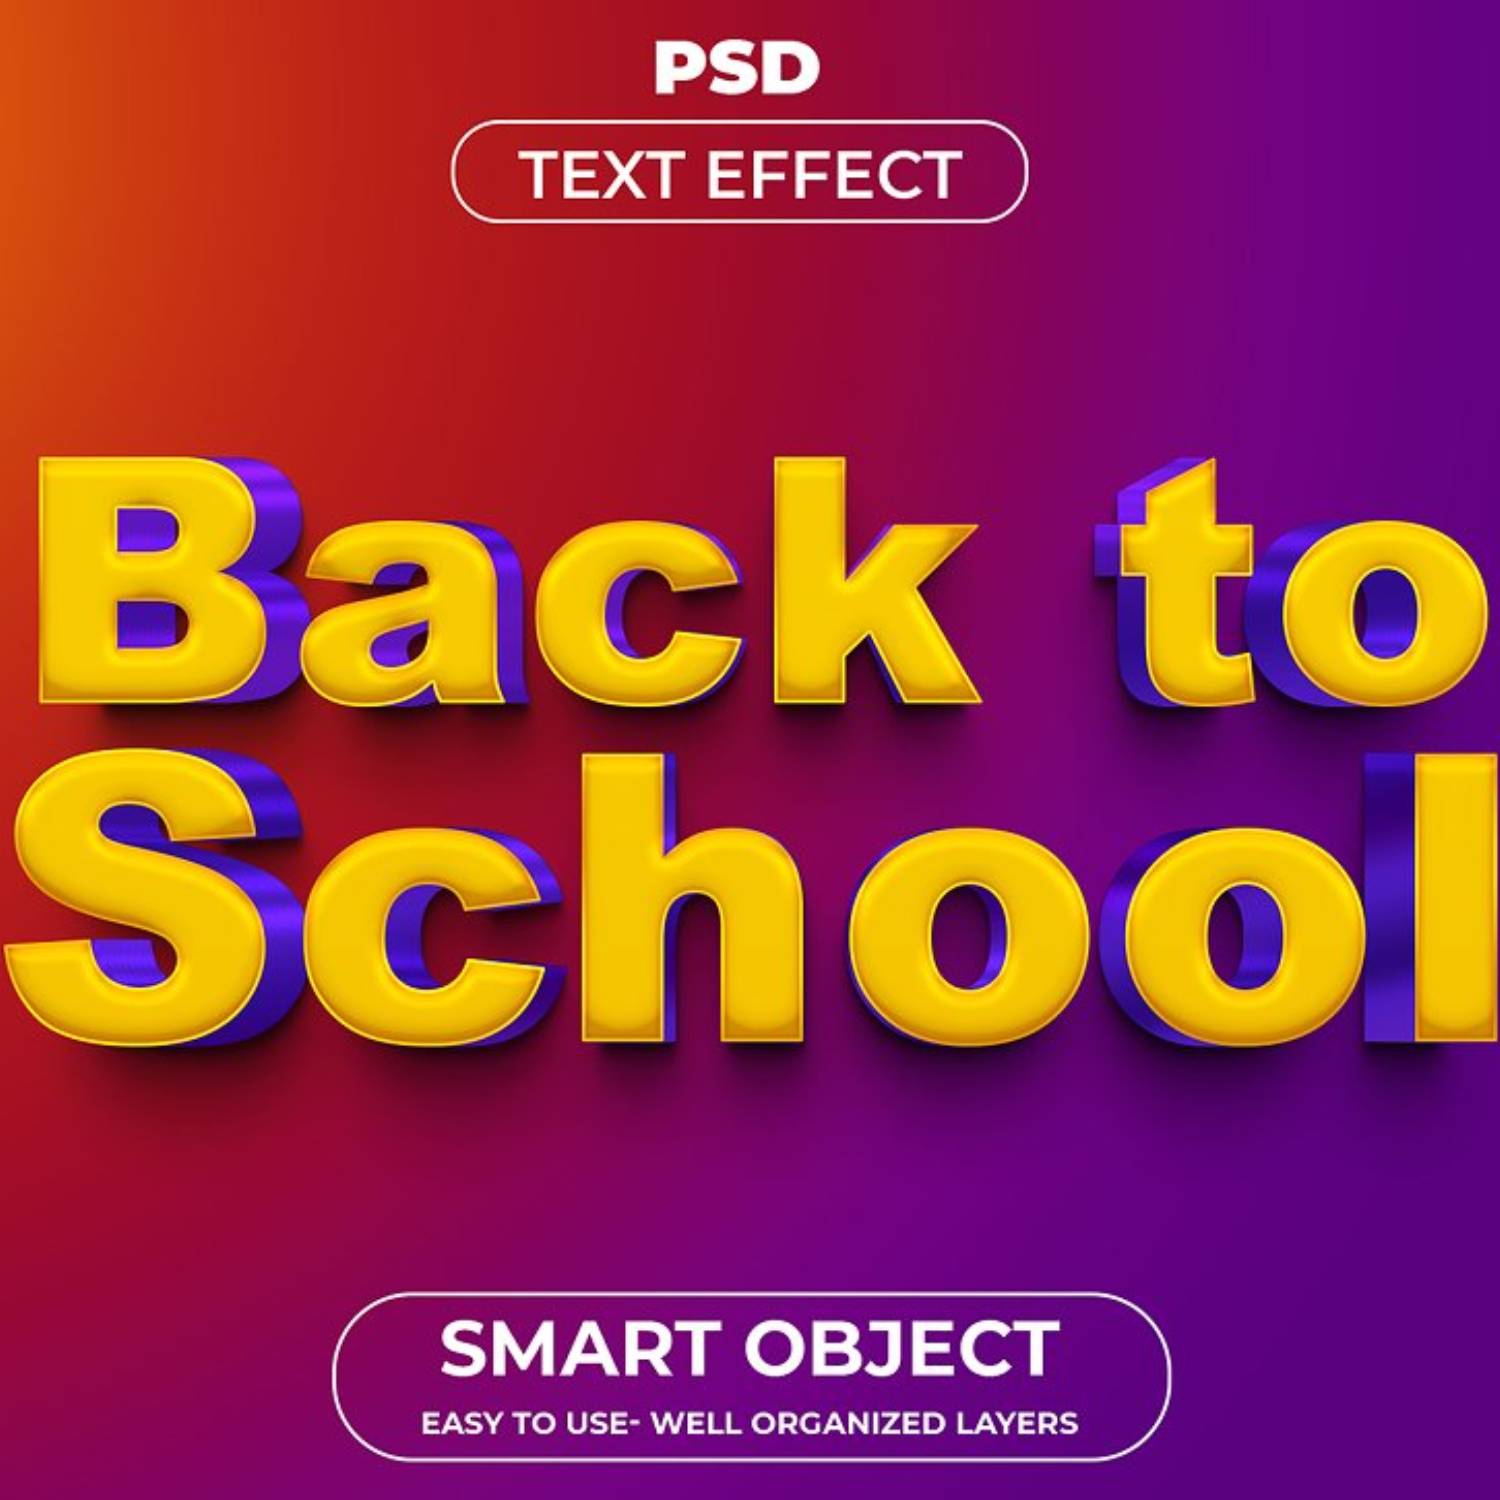 Back to school poster with the text back to school.